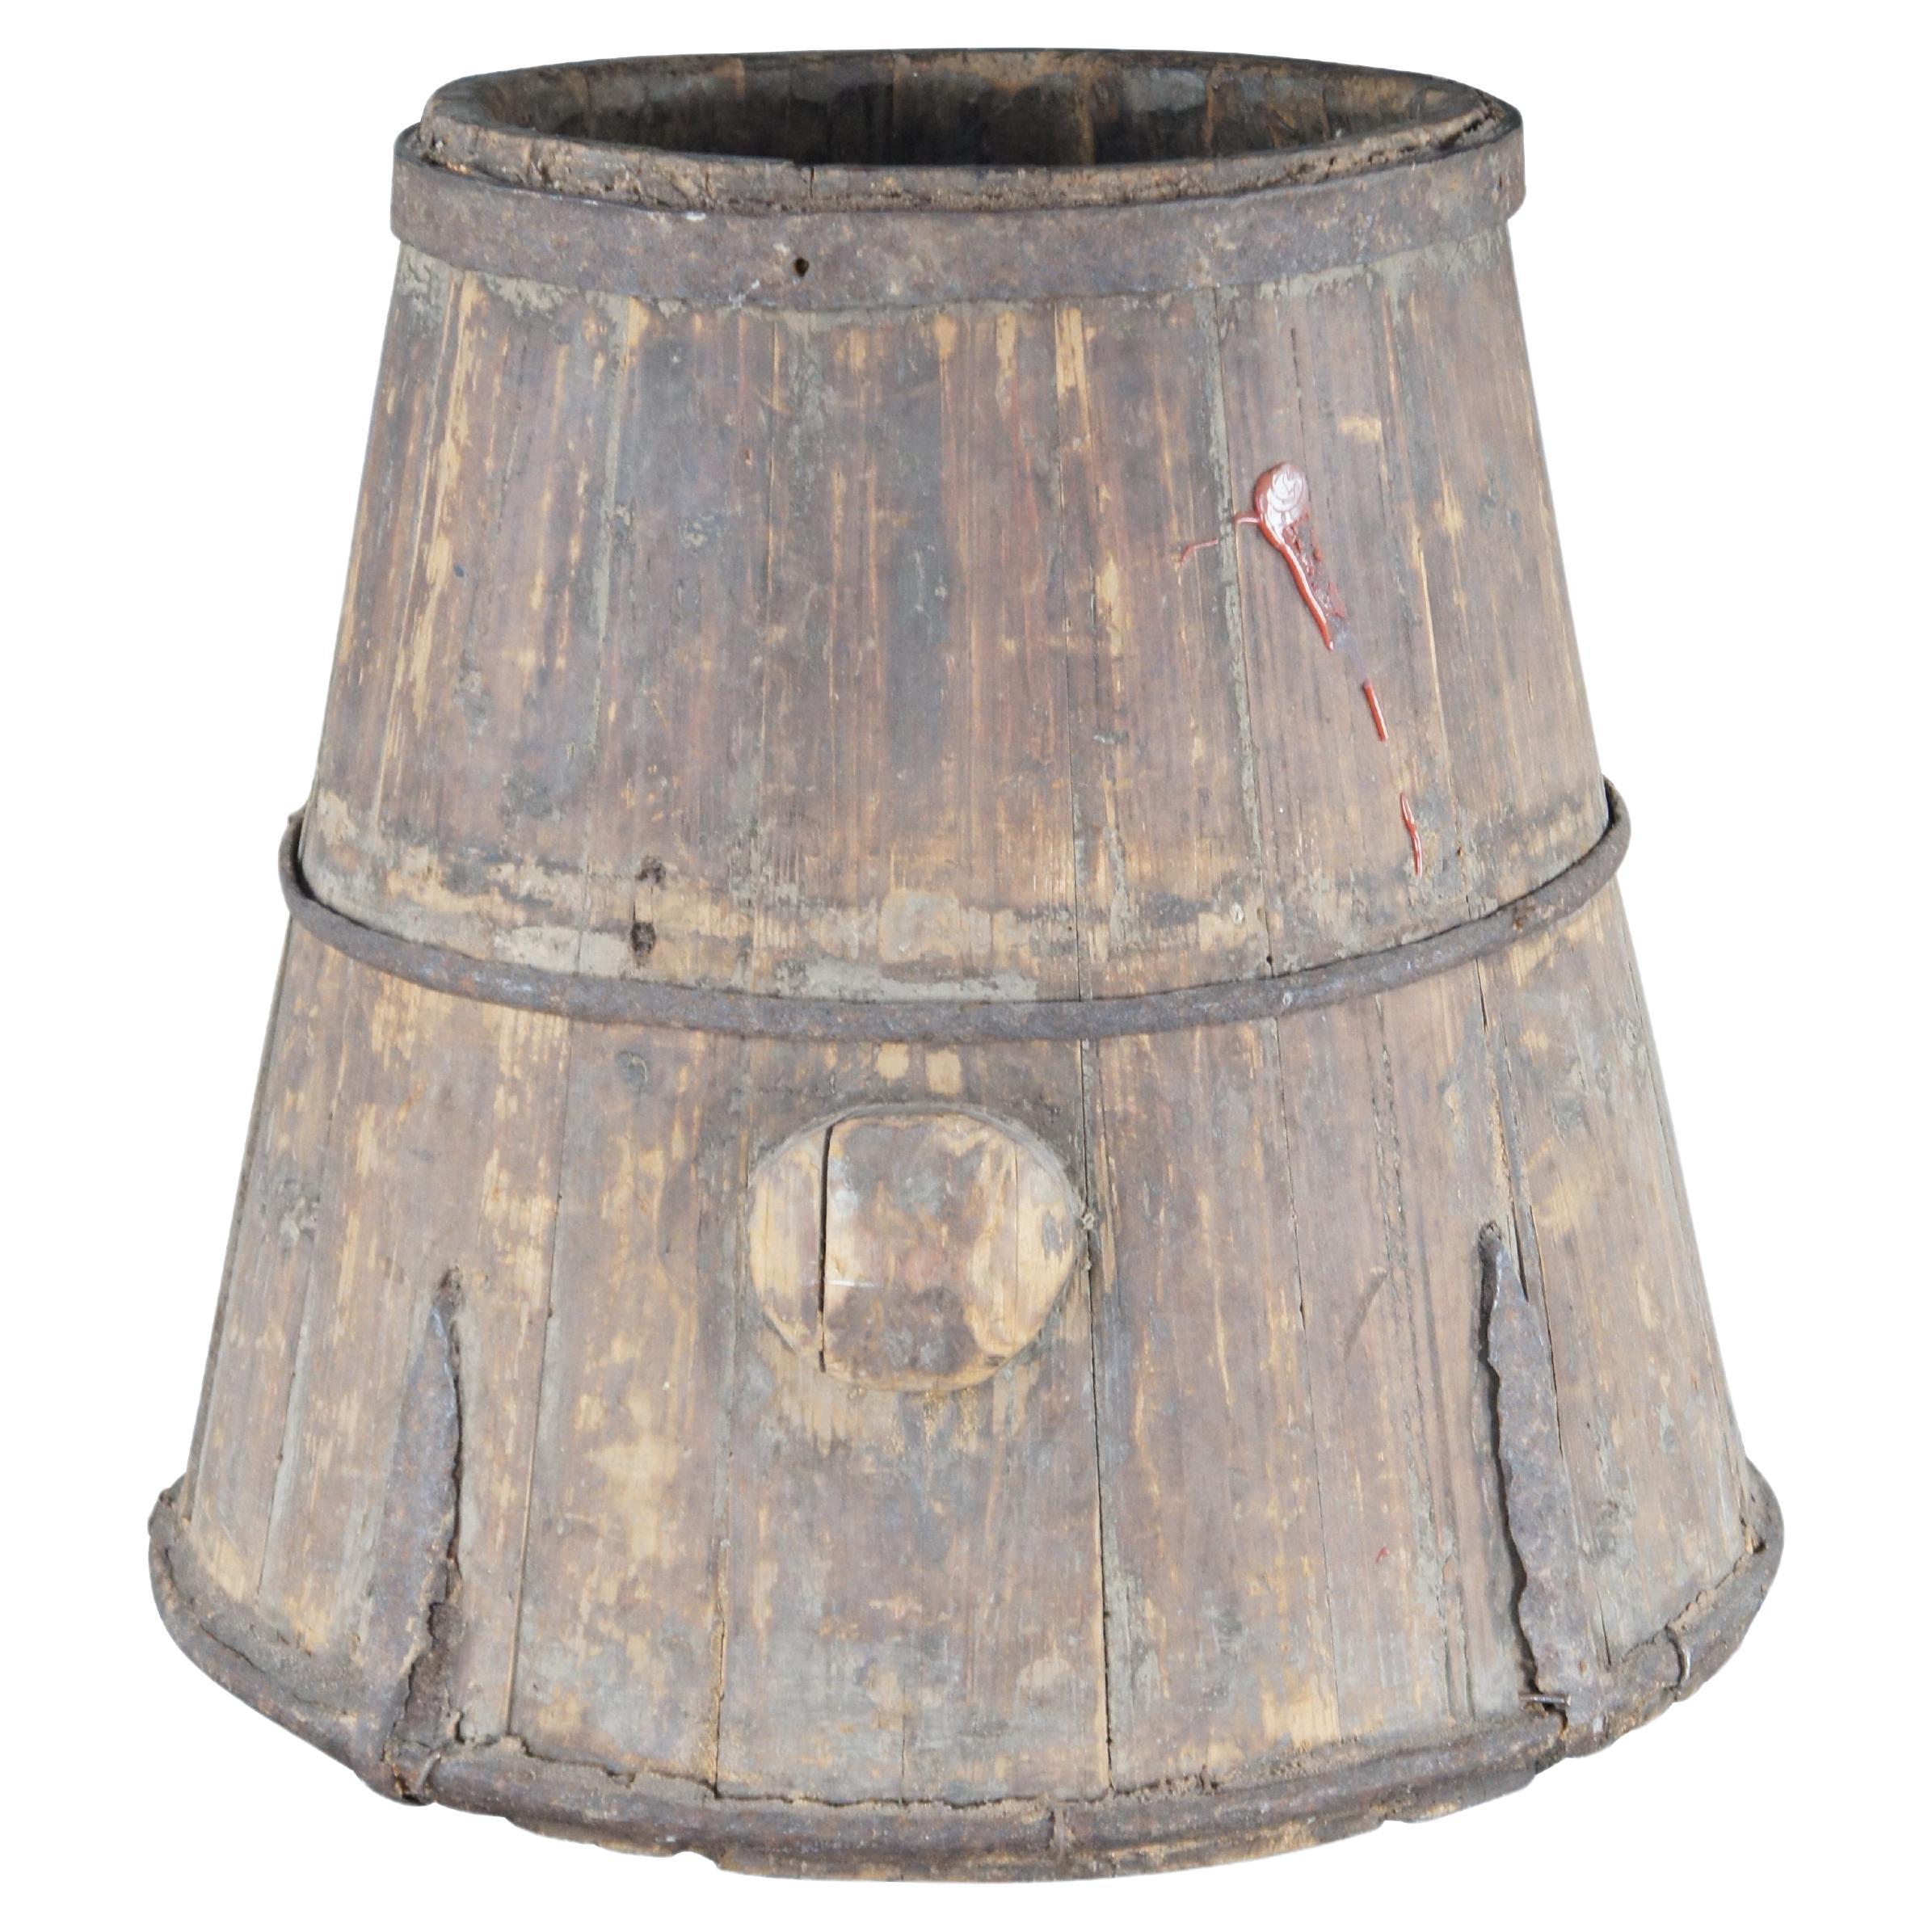 Primitive Chinese Shanxi Banded Iron Barrel Willow Rice Measure Grain Bucket 16" For Sale